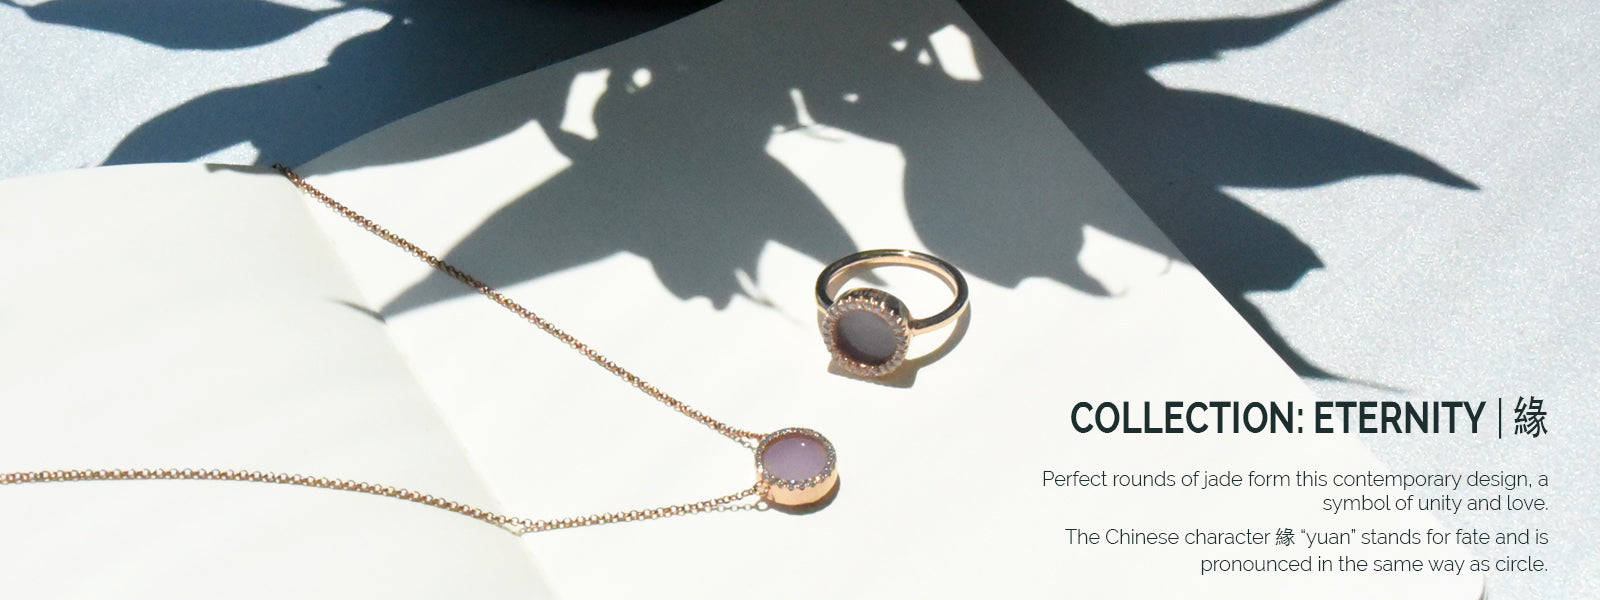 Eternity collection: lavender jade jewelry necklace and ring in modern minimal style